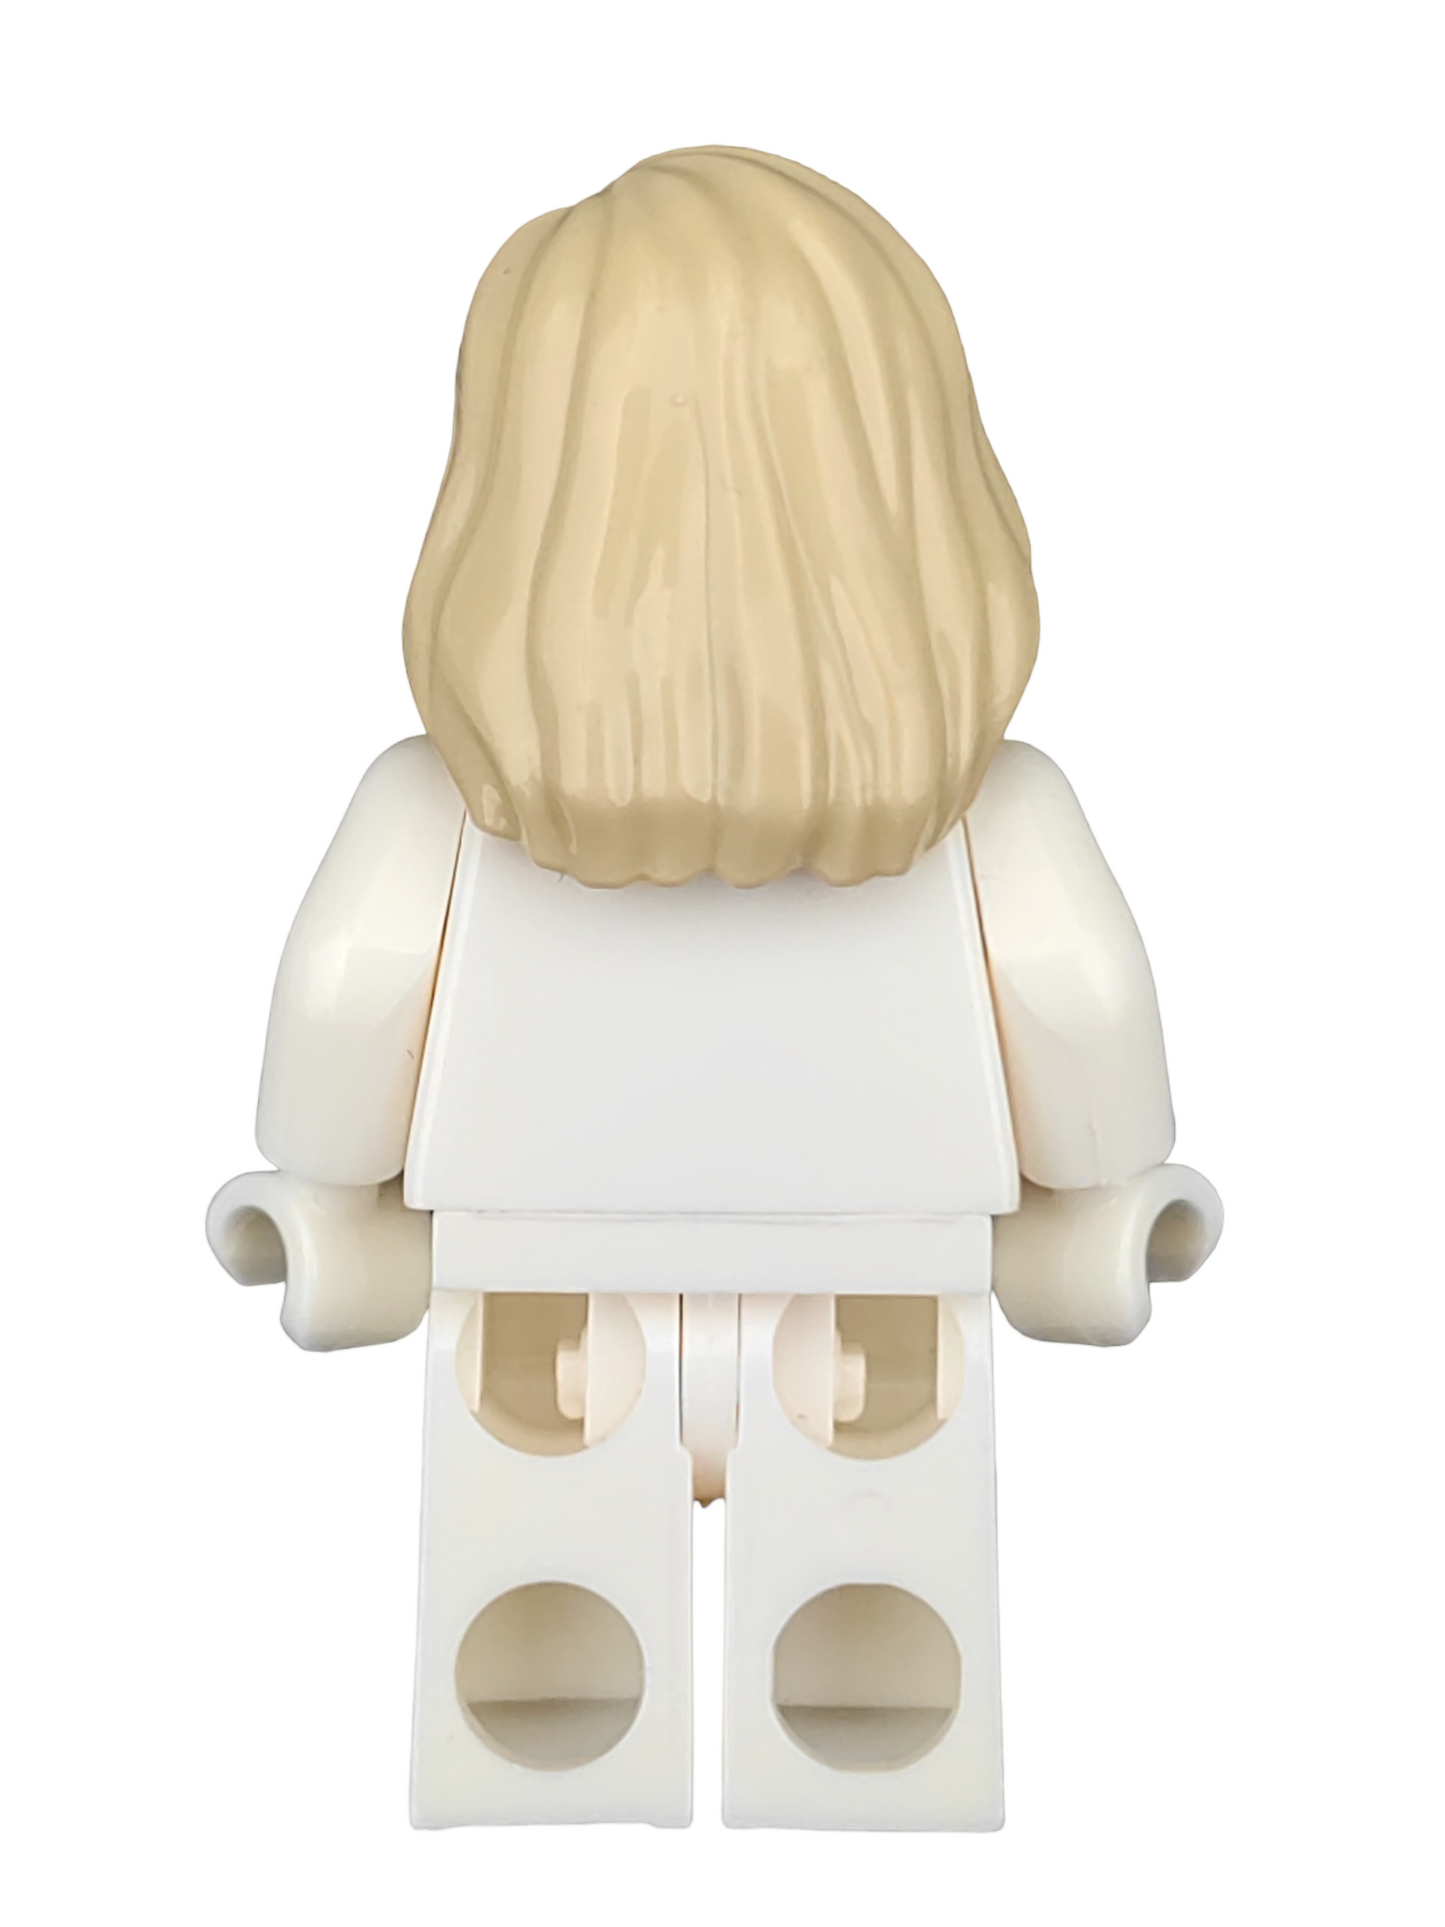 LEGO Wig, Light Tan Hair with Parting Draped over Right Shoulder - UB1258